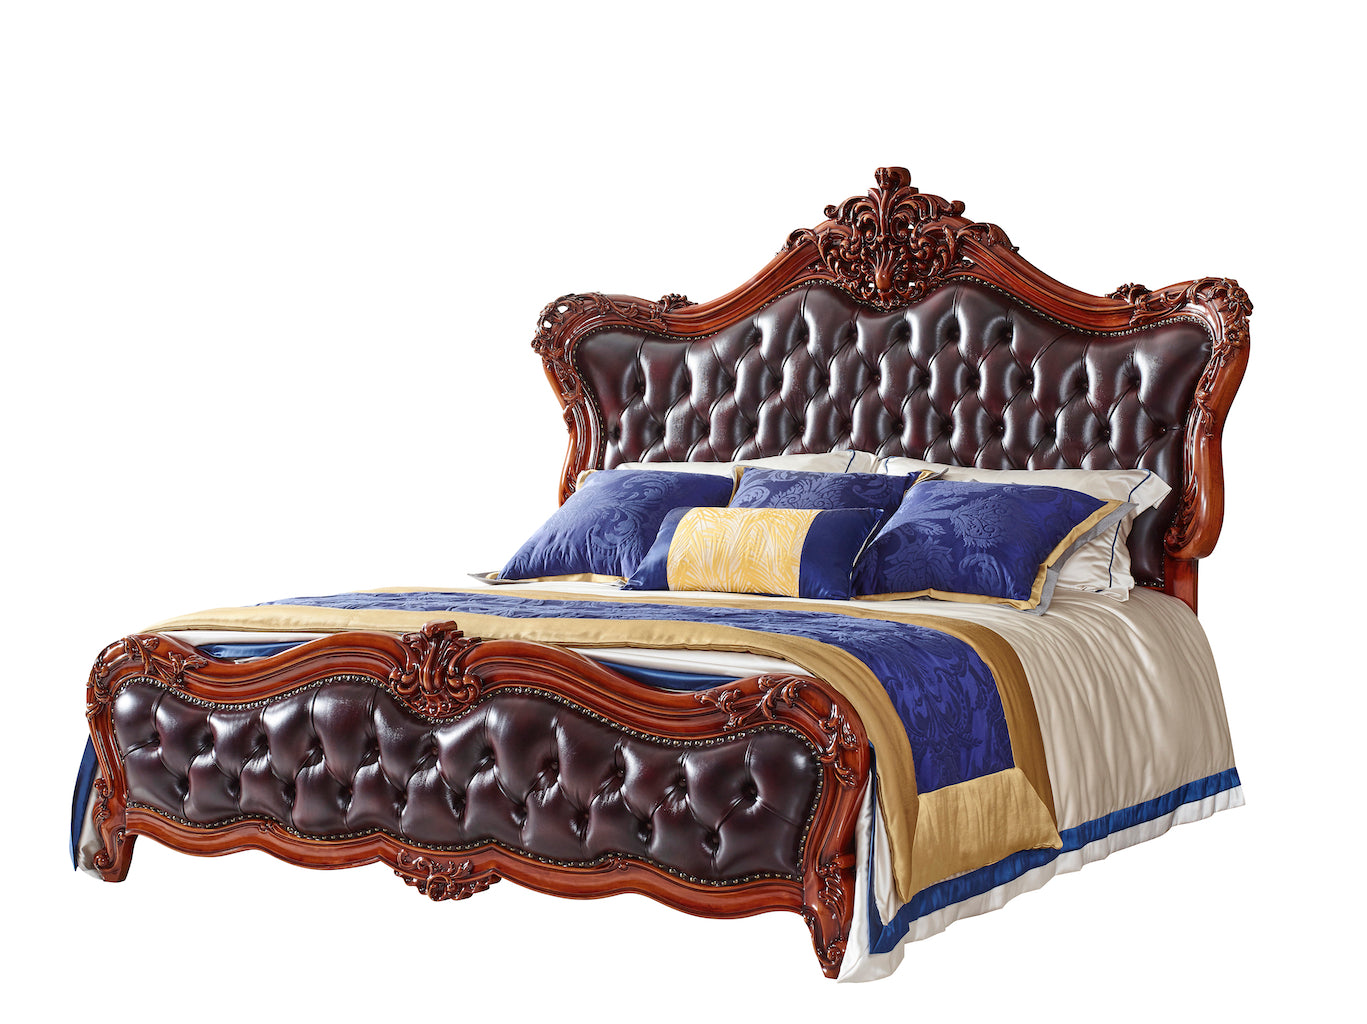 Armand French Bed